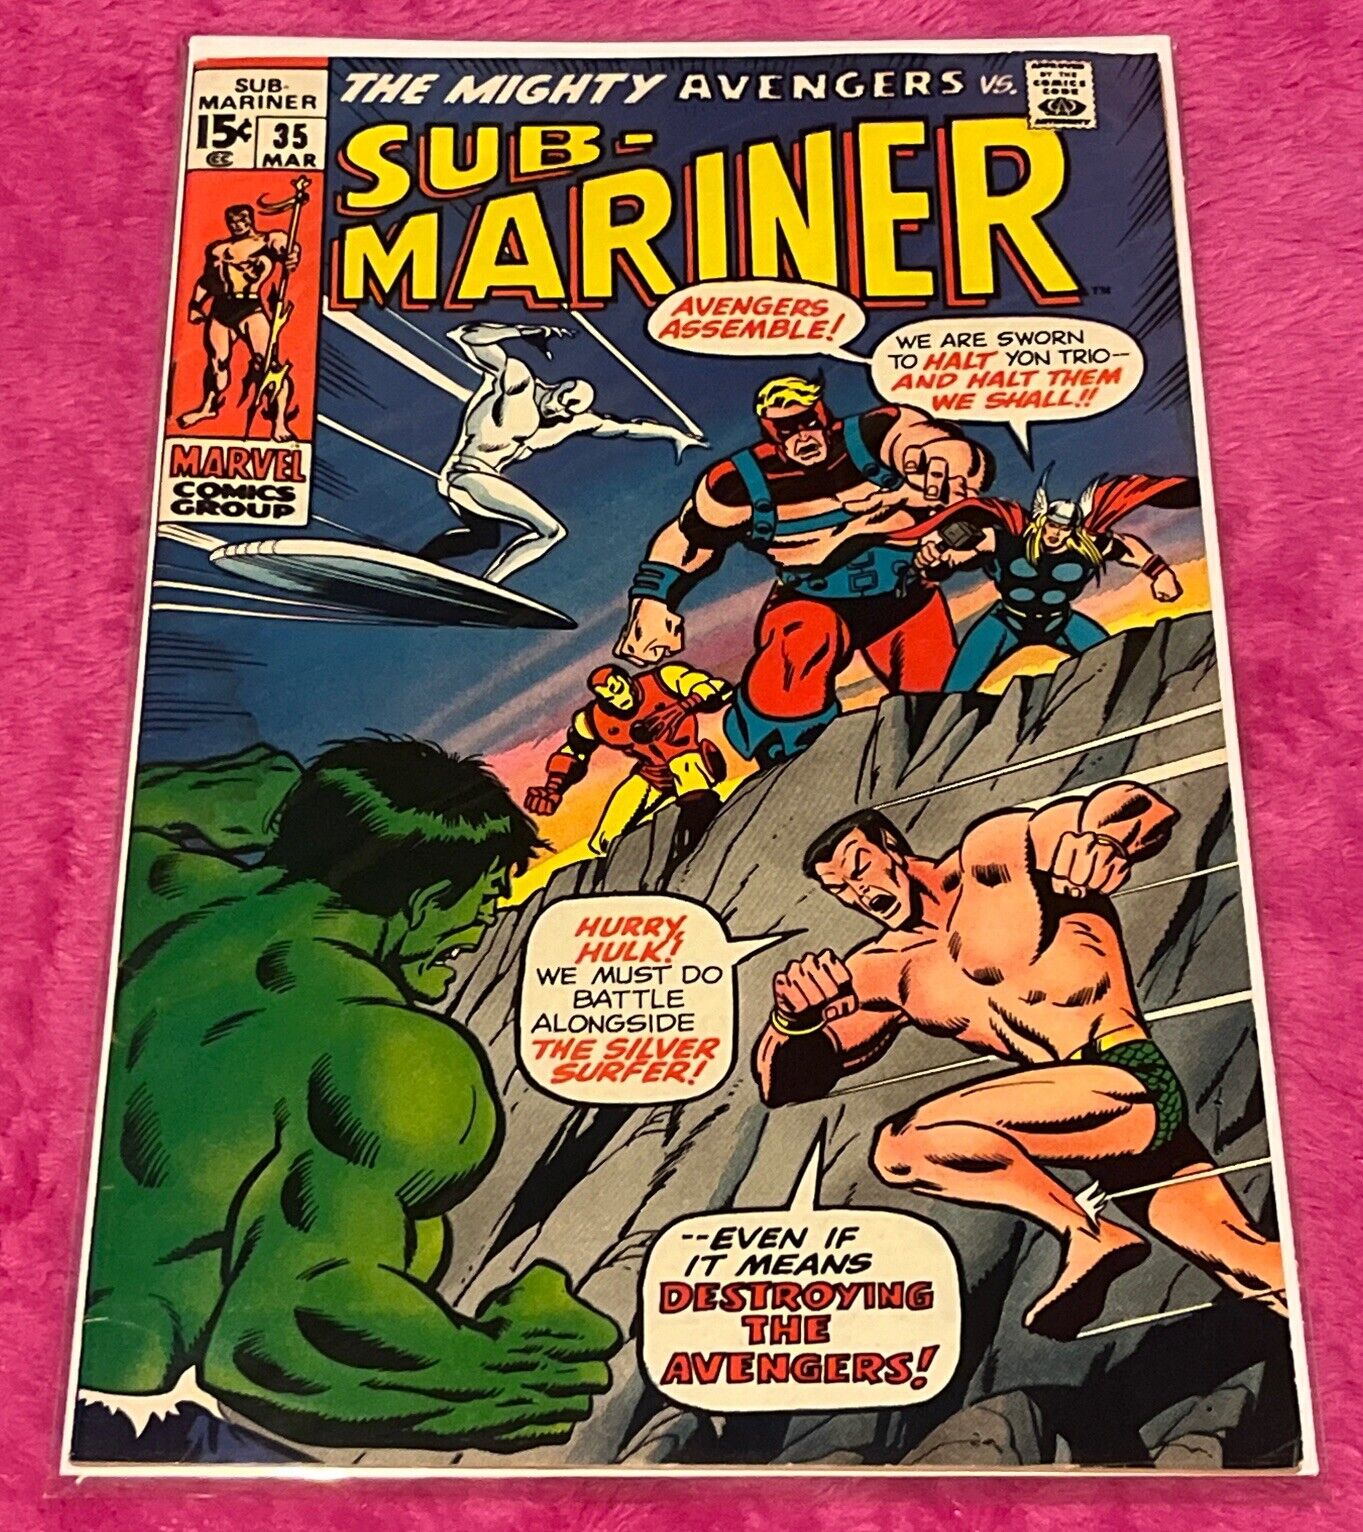 1971 Sub-Mariner #35 - The Mighty Avengers Appearance